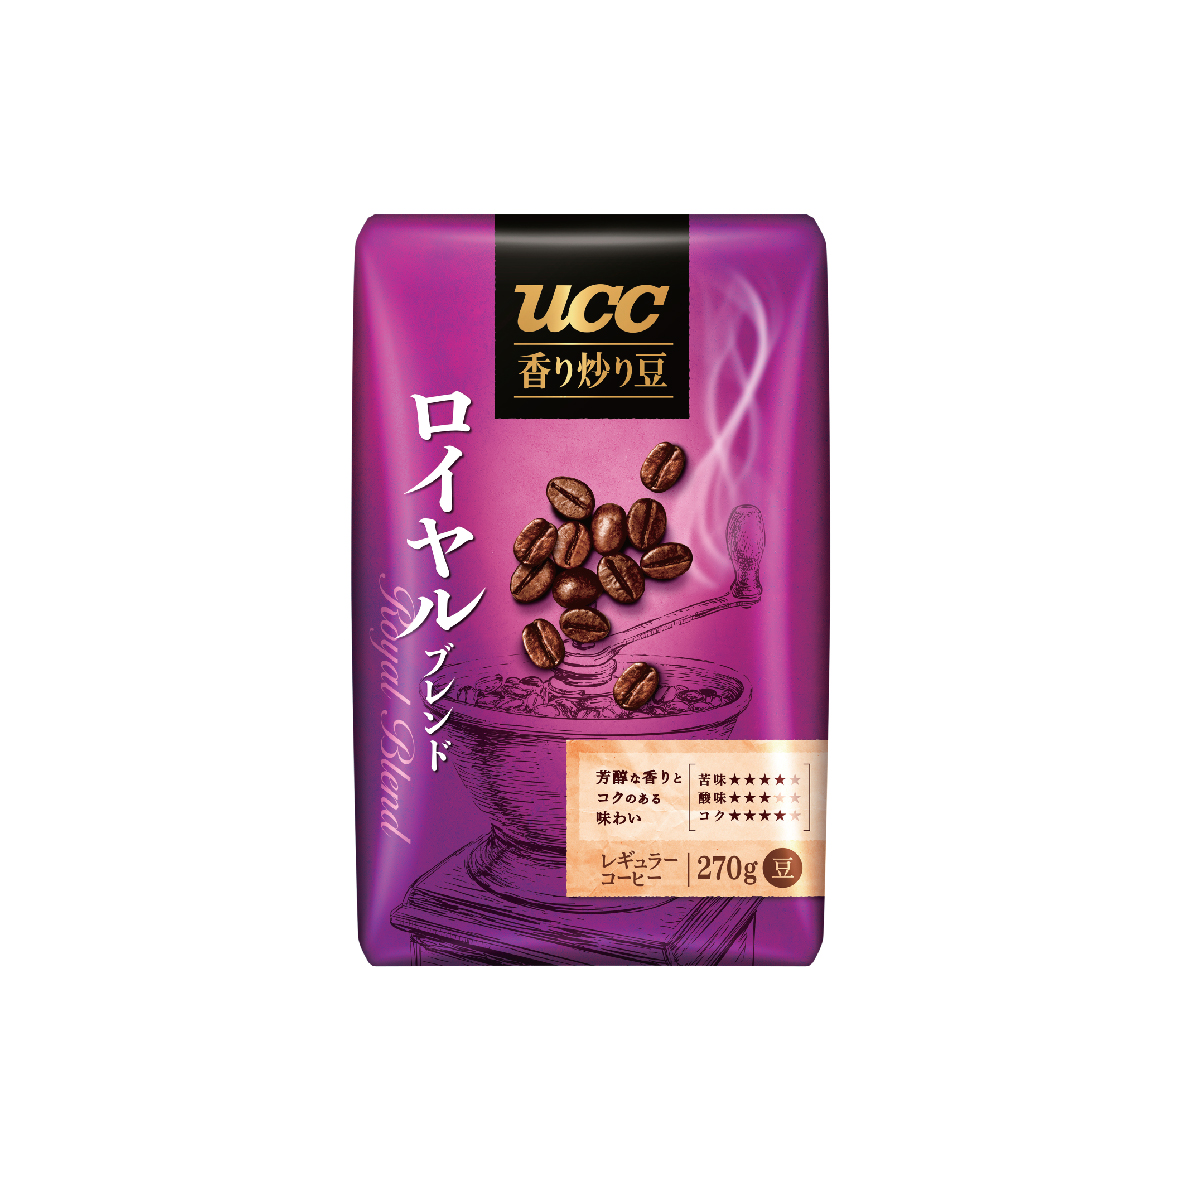 UCC Royal Blend Roasted Coffee Beans